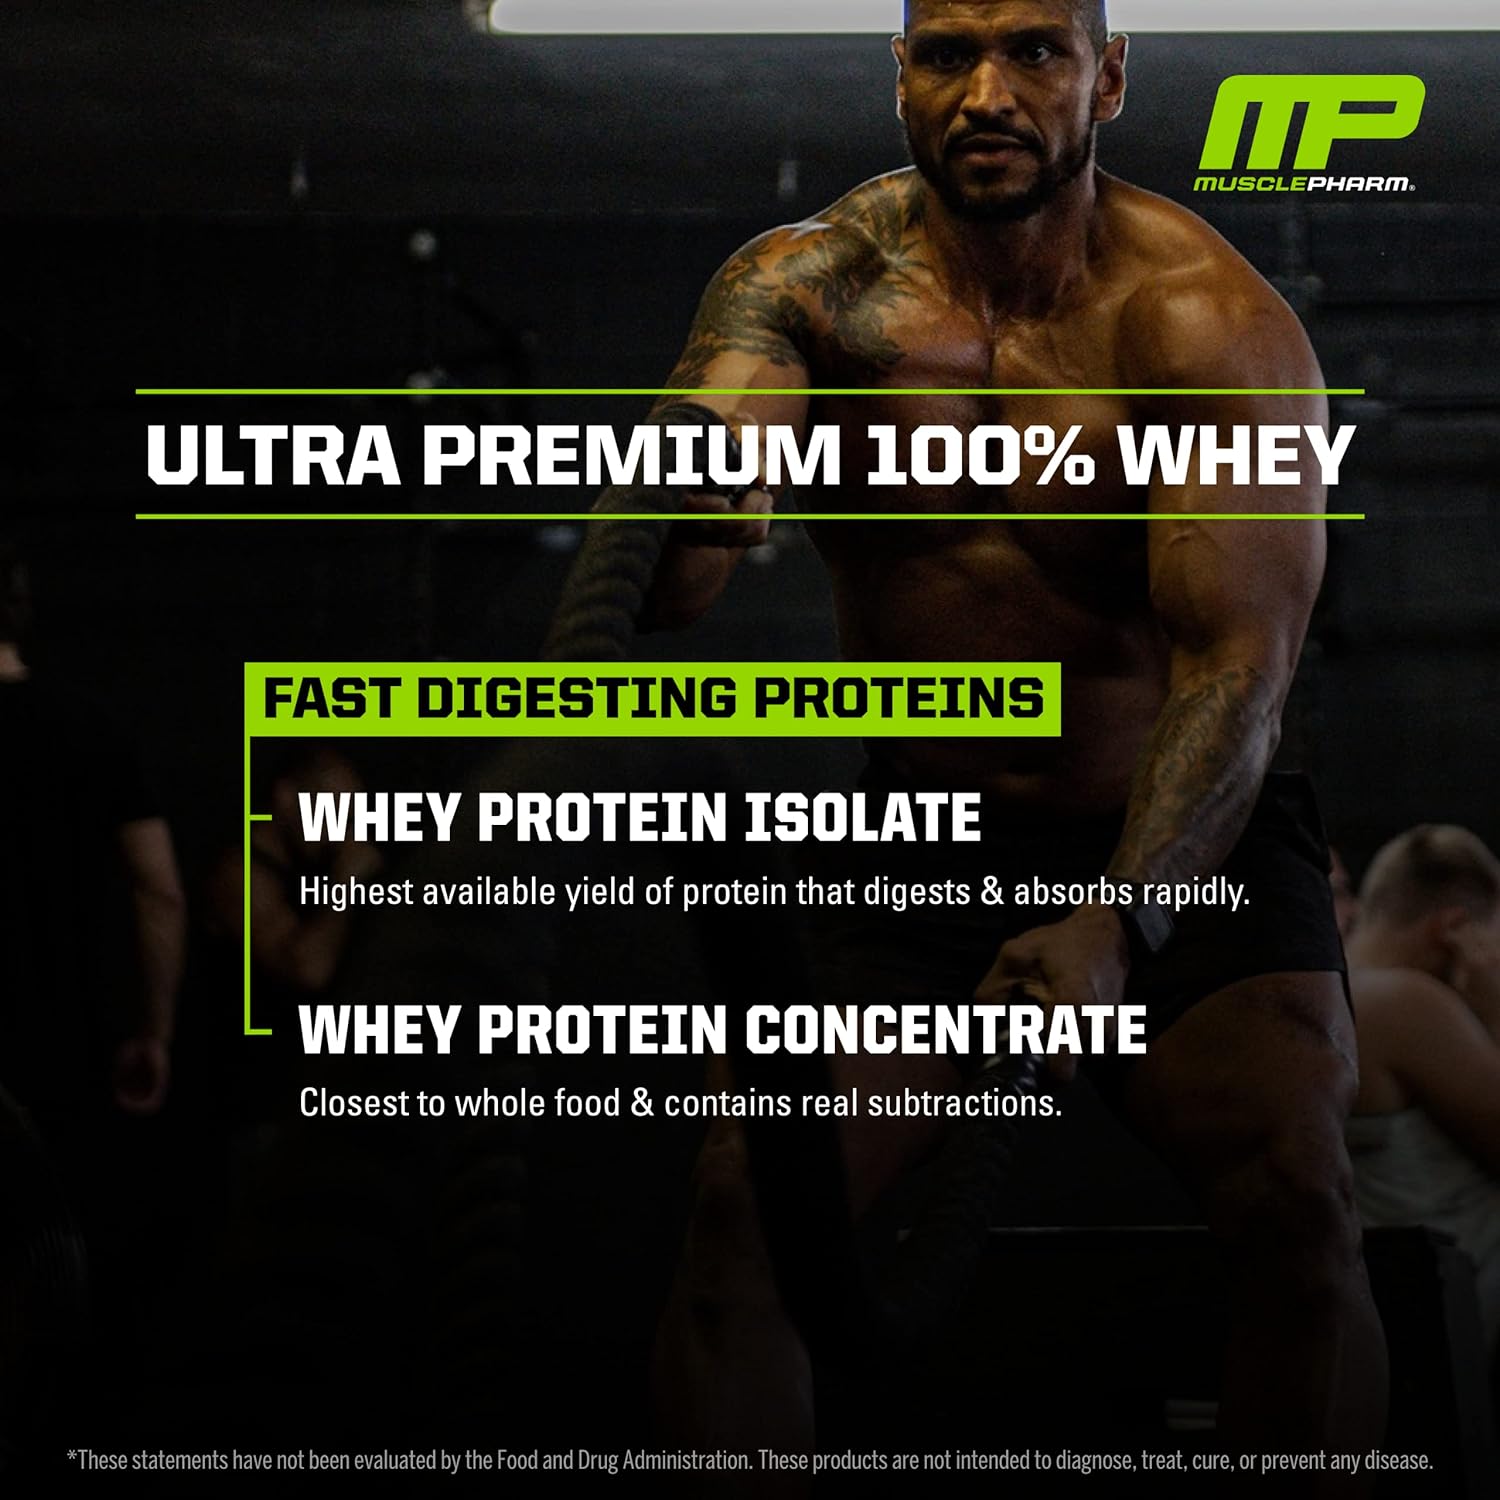 MusclePharm Combat 100% Whey, Cappuccino - 5 lb Protein Powder - Glute